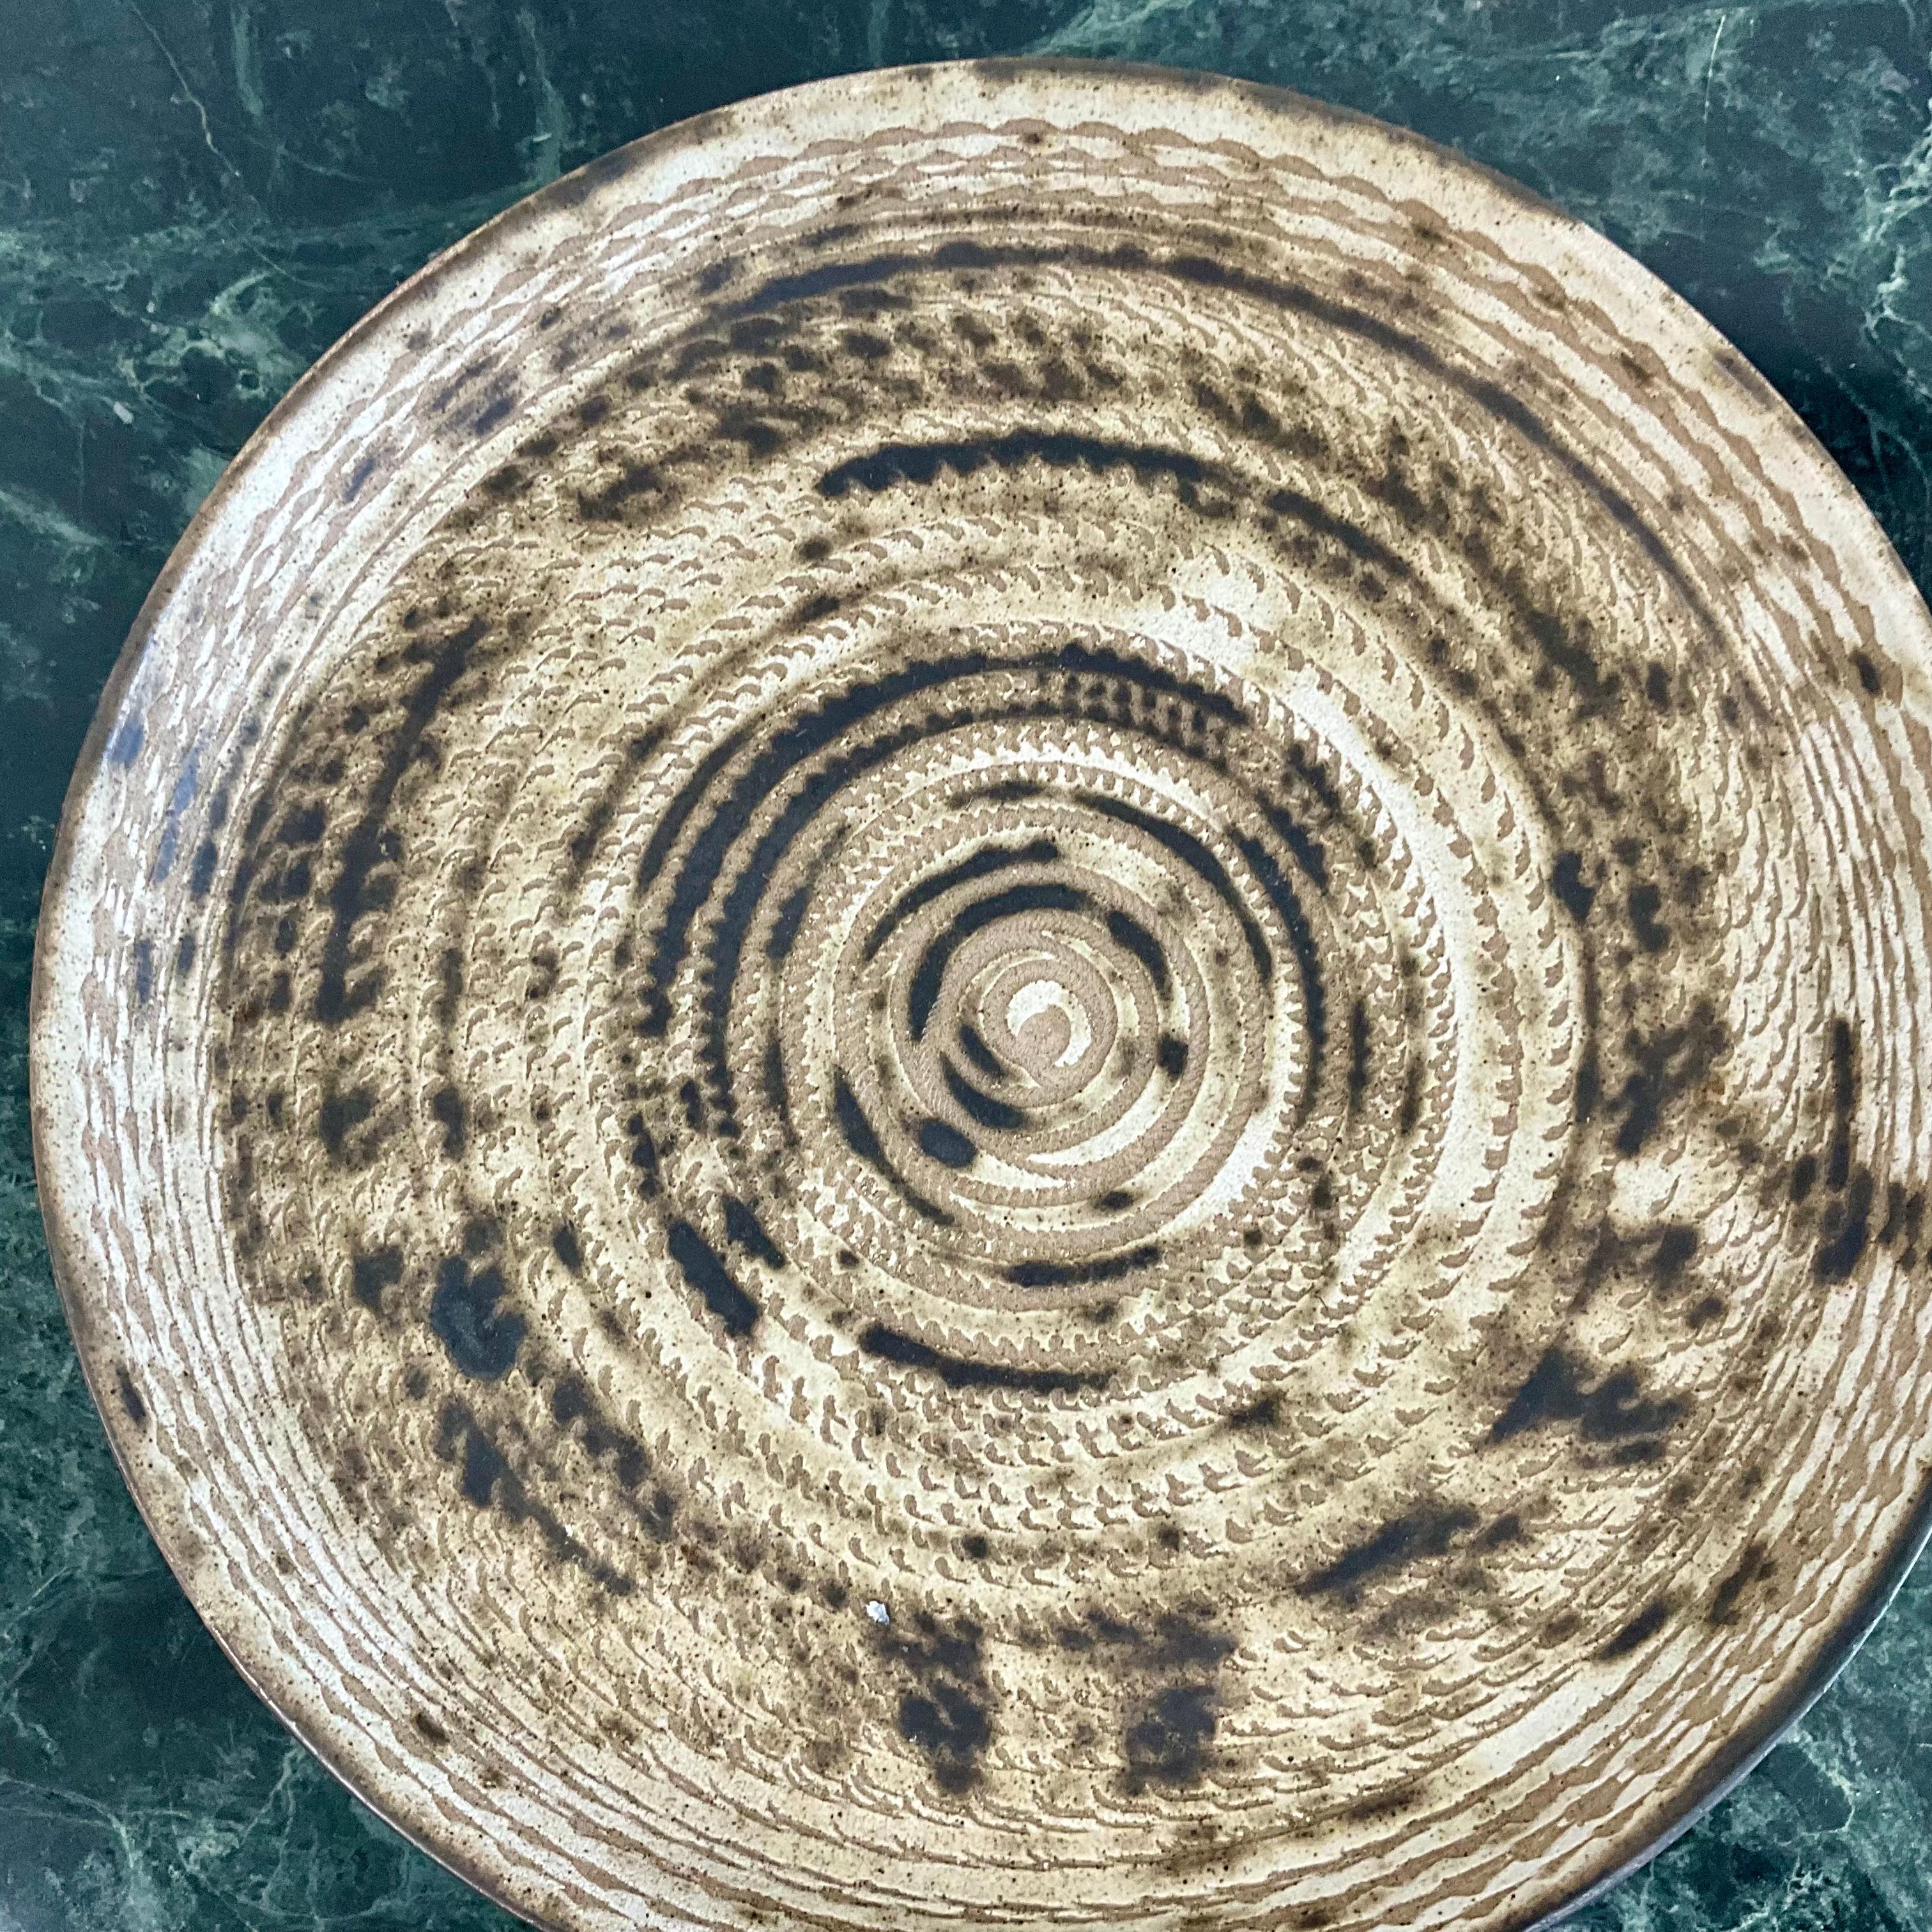 Pottery charger plate in cream and brown by artist Gordon and Jane Martz for Marshall Studios.  Executed in the 1950’s this piece measures 13” in diameter and 1.5” high.


BIOGRAPHY
Gordon Martz married Jane Marshall soon after graduating from